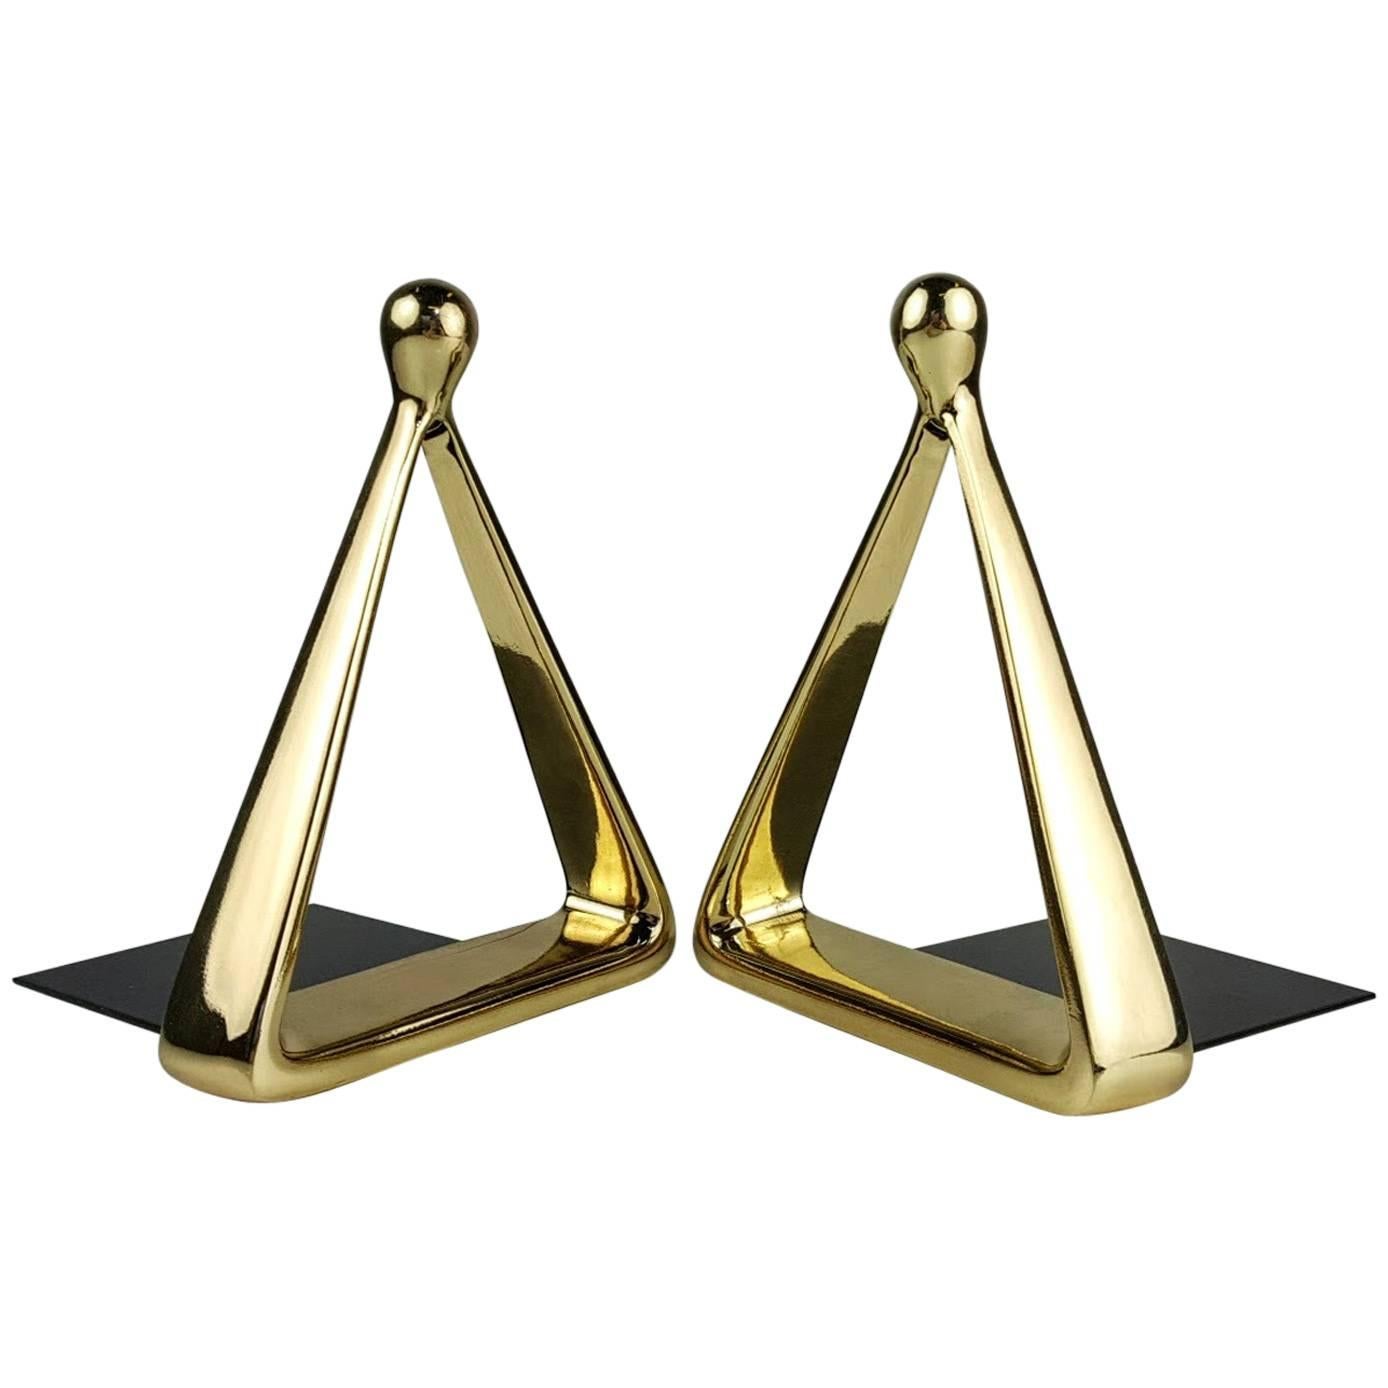 Pristine Pair of Brass Stirrup Bookends by Ben Seibel for Jenfred Ware, 1950s